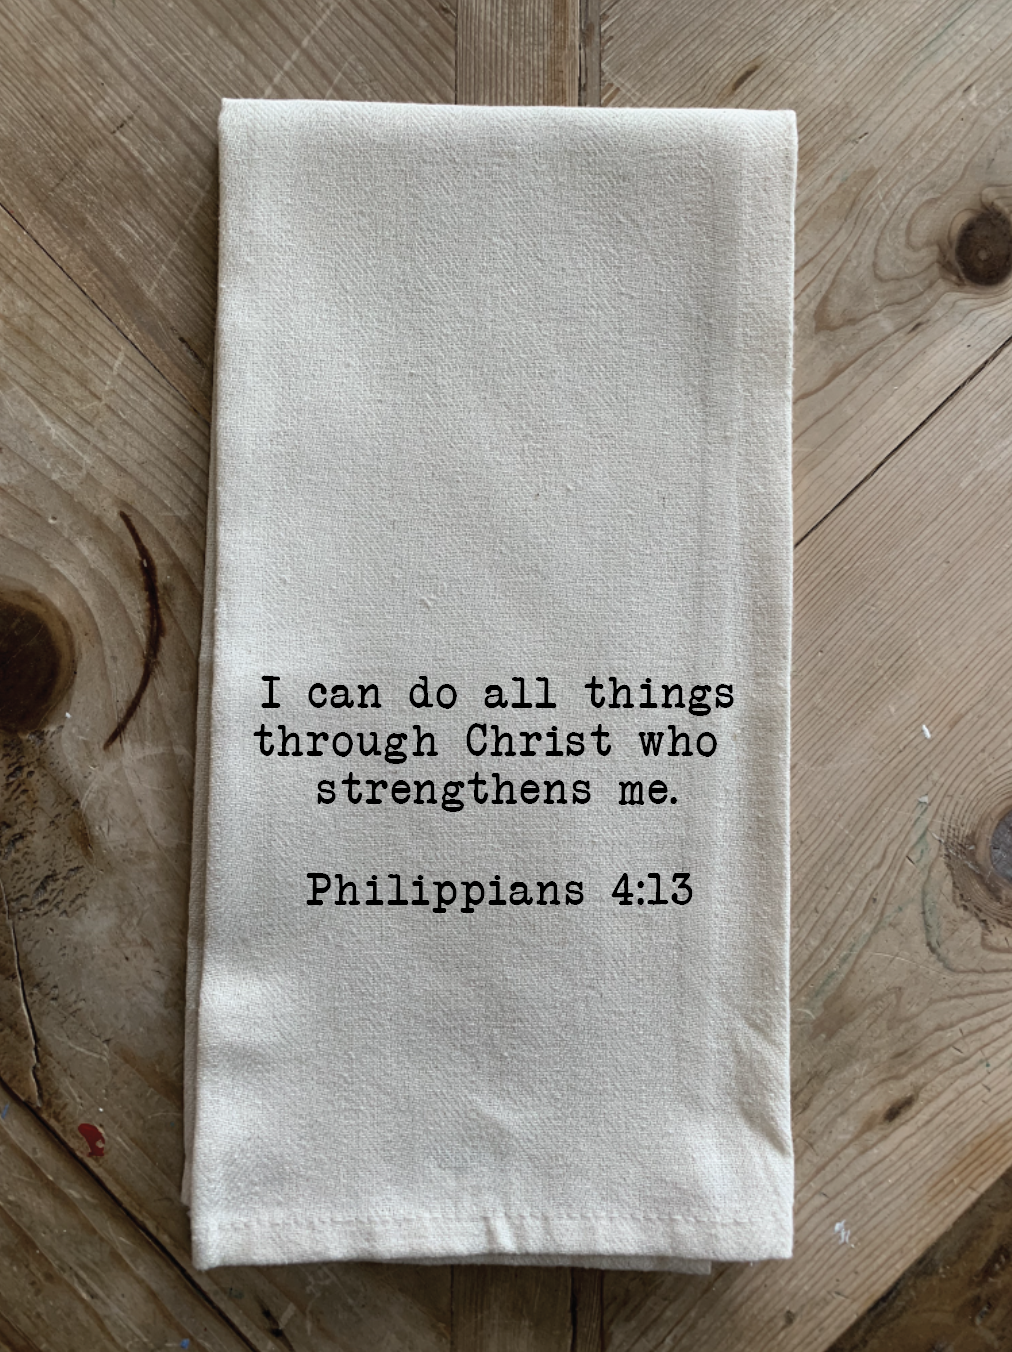 I can do all things through Christ who strengthens me. ~ Philippians 4:13